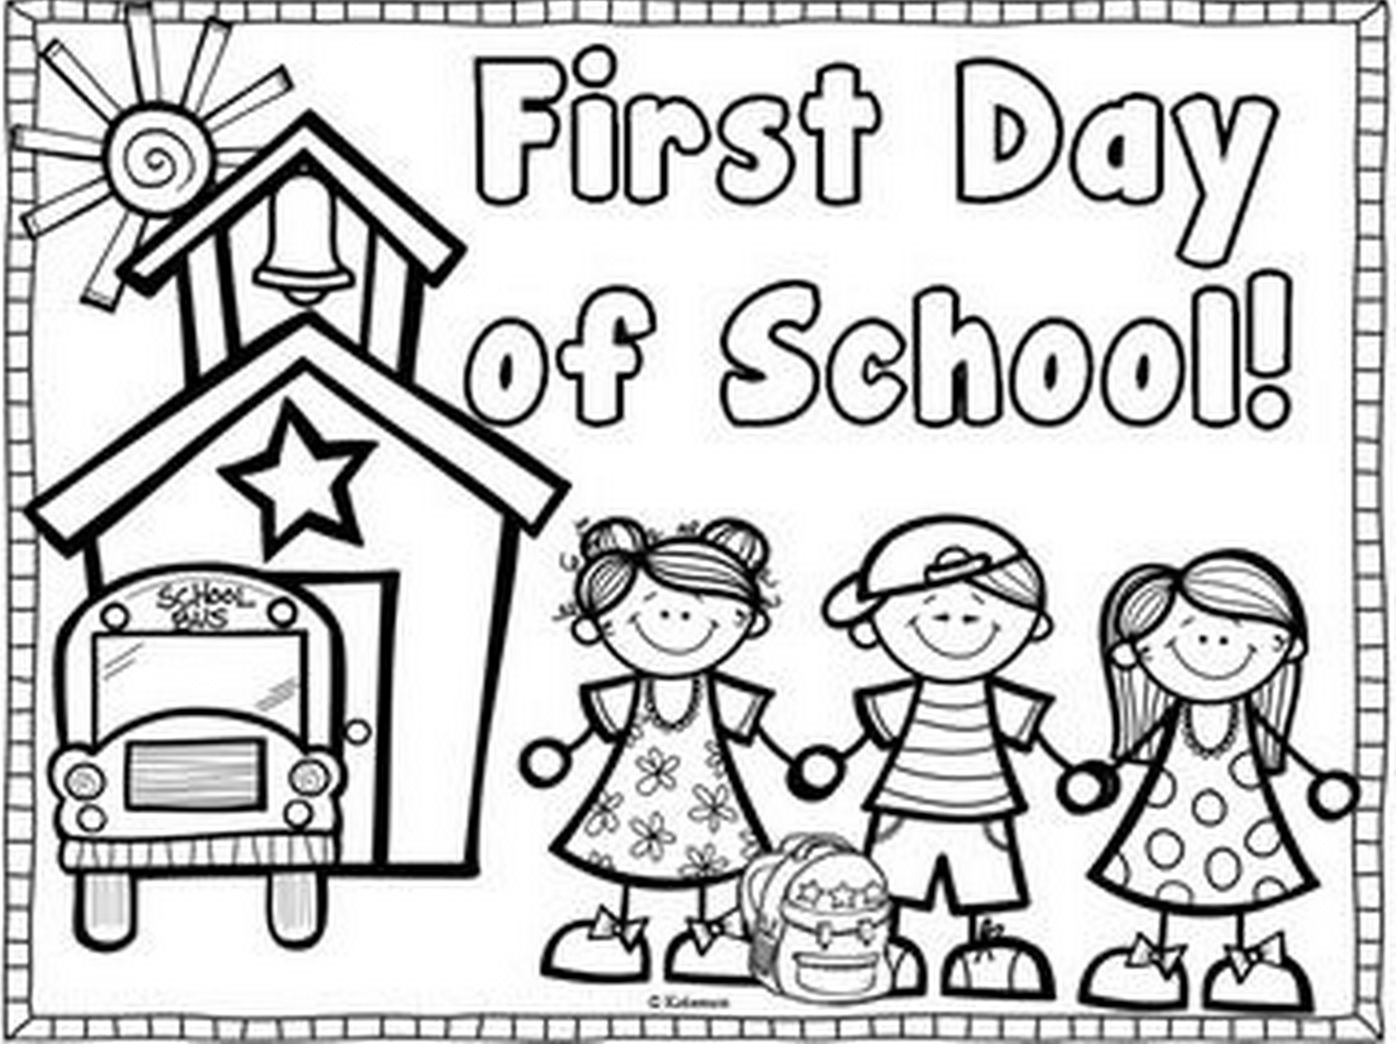 first-day-of-kindergarten-coloring-page-kids-coloring-page-first